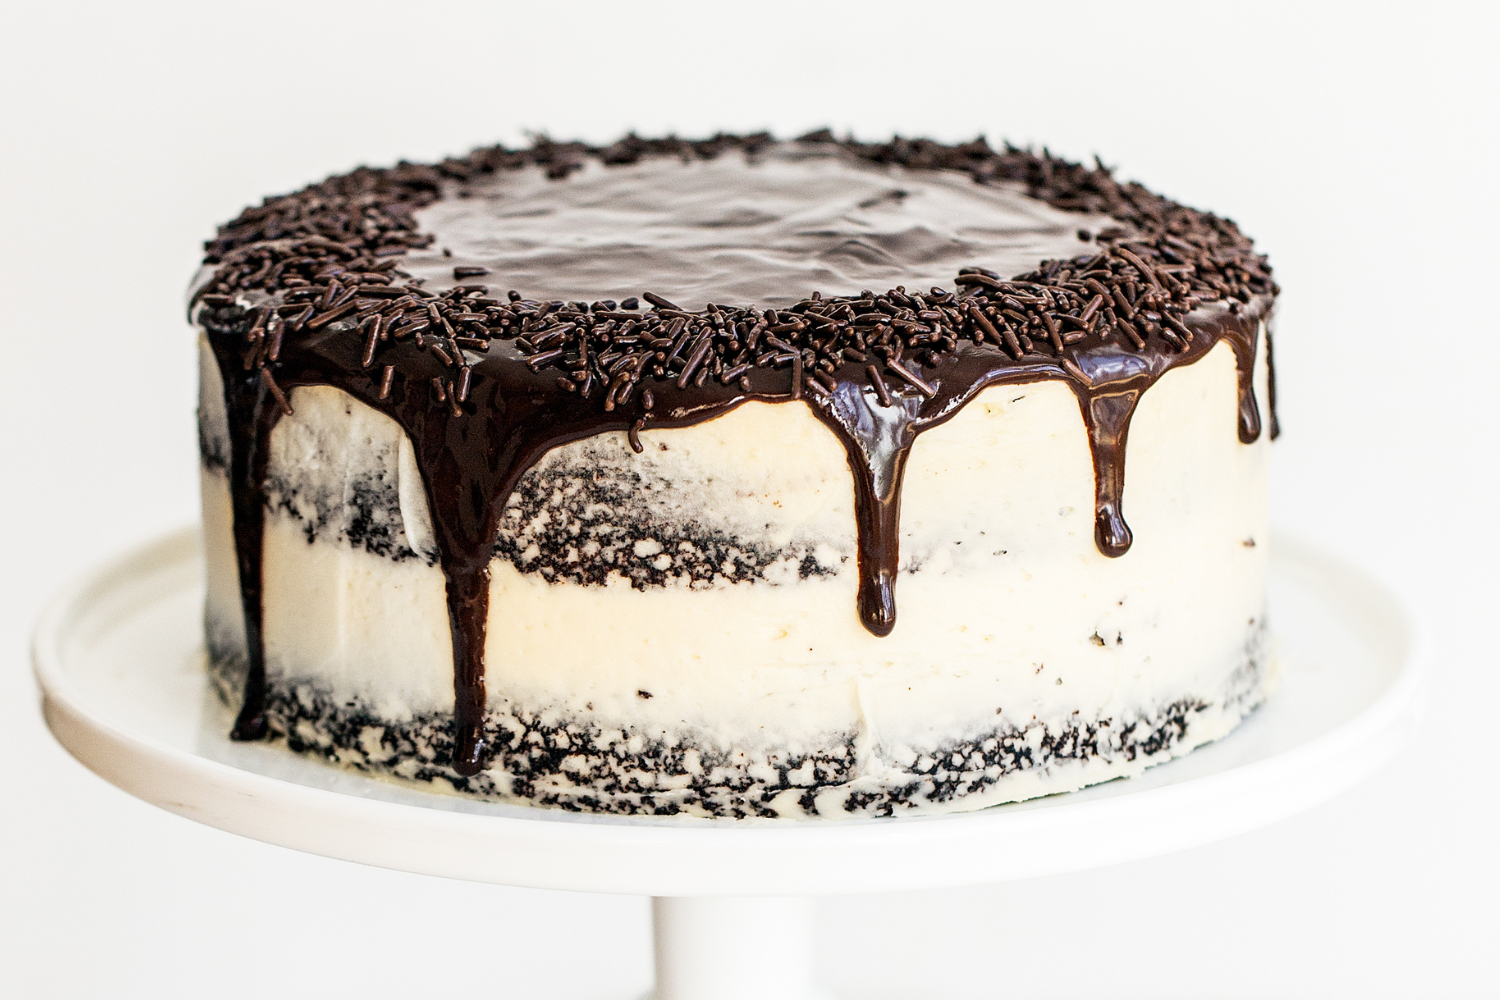 the whole Guinness Chocolate Cake with Irish Buttercream with ganache drip, on a cake stand.